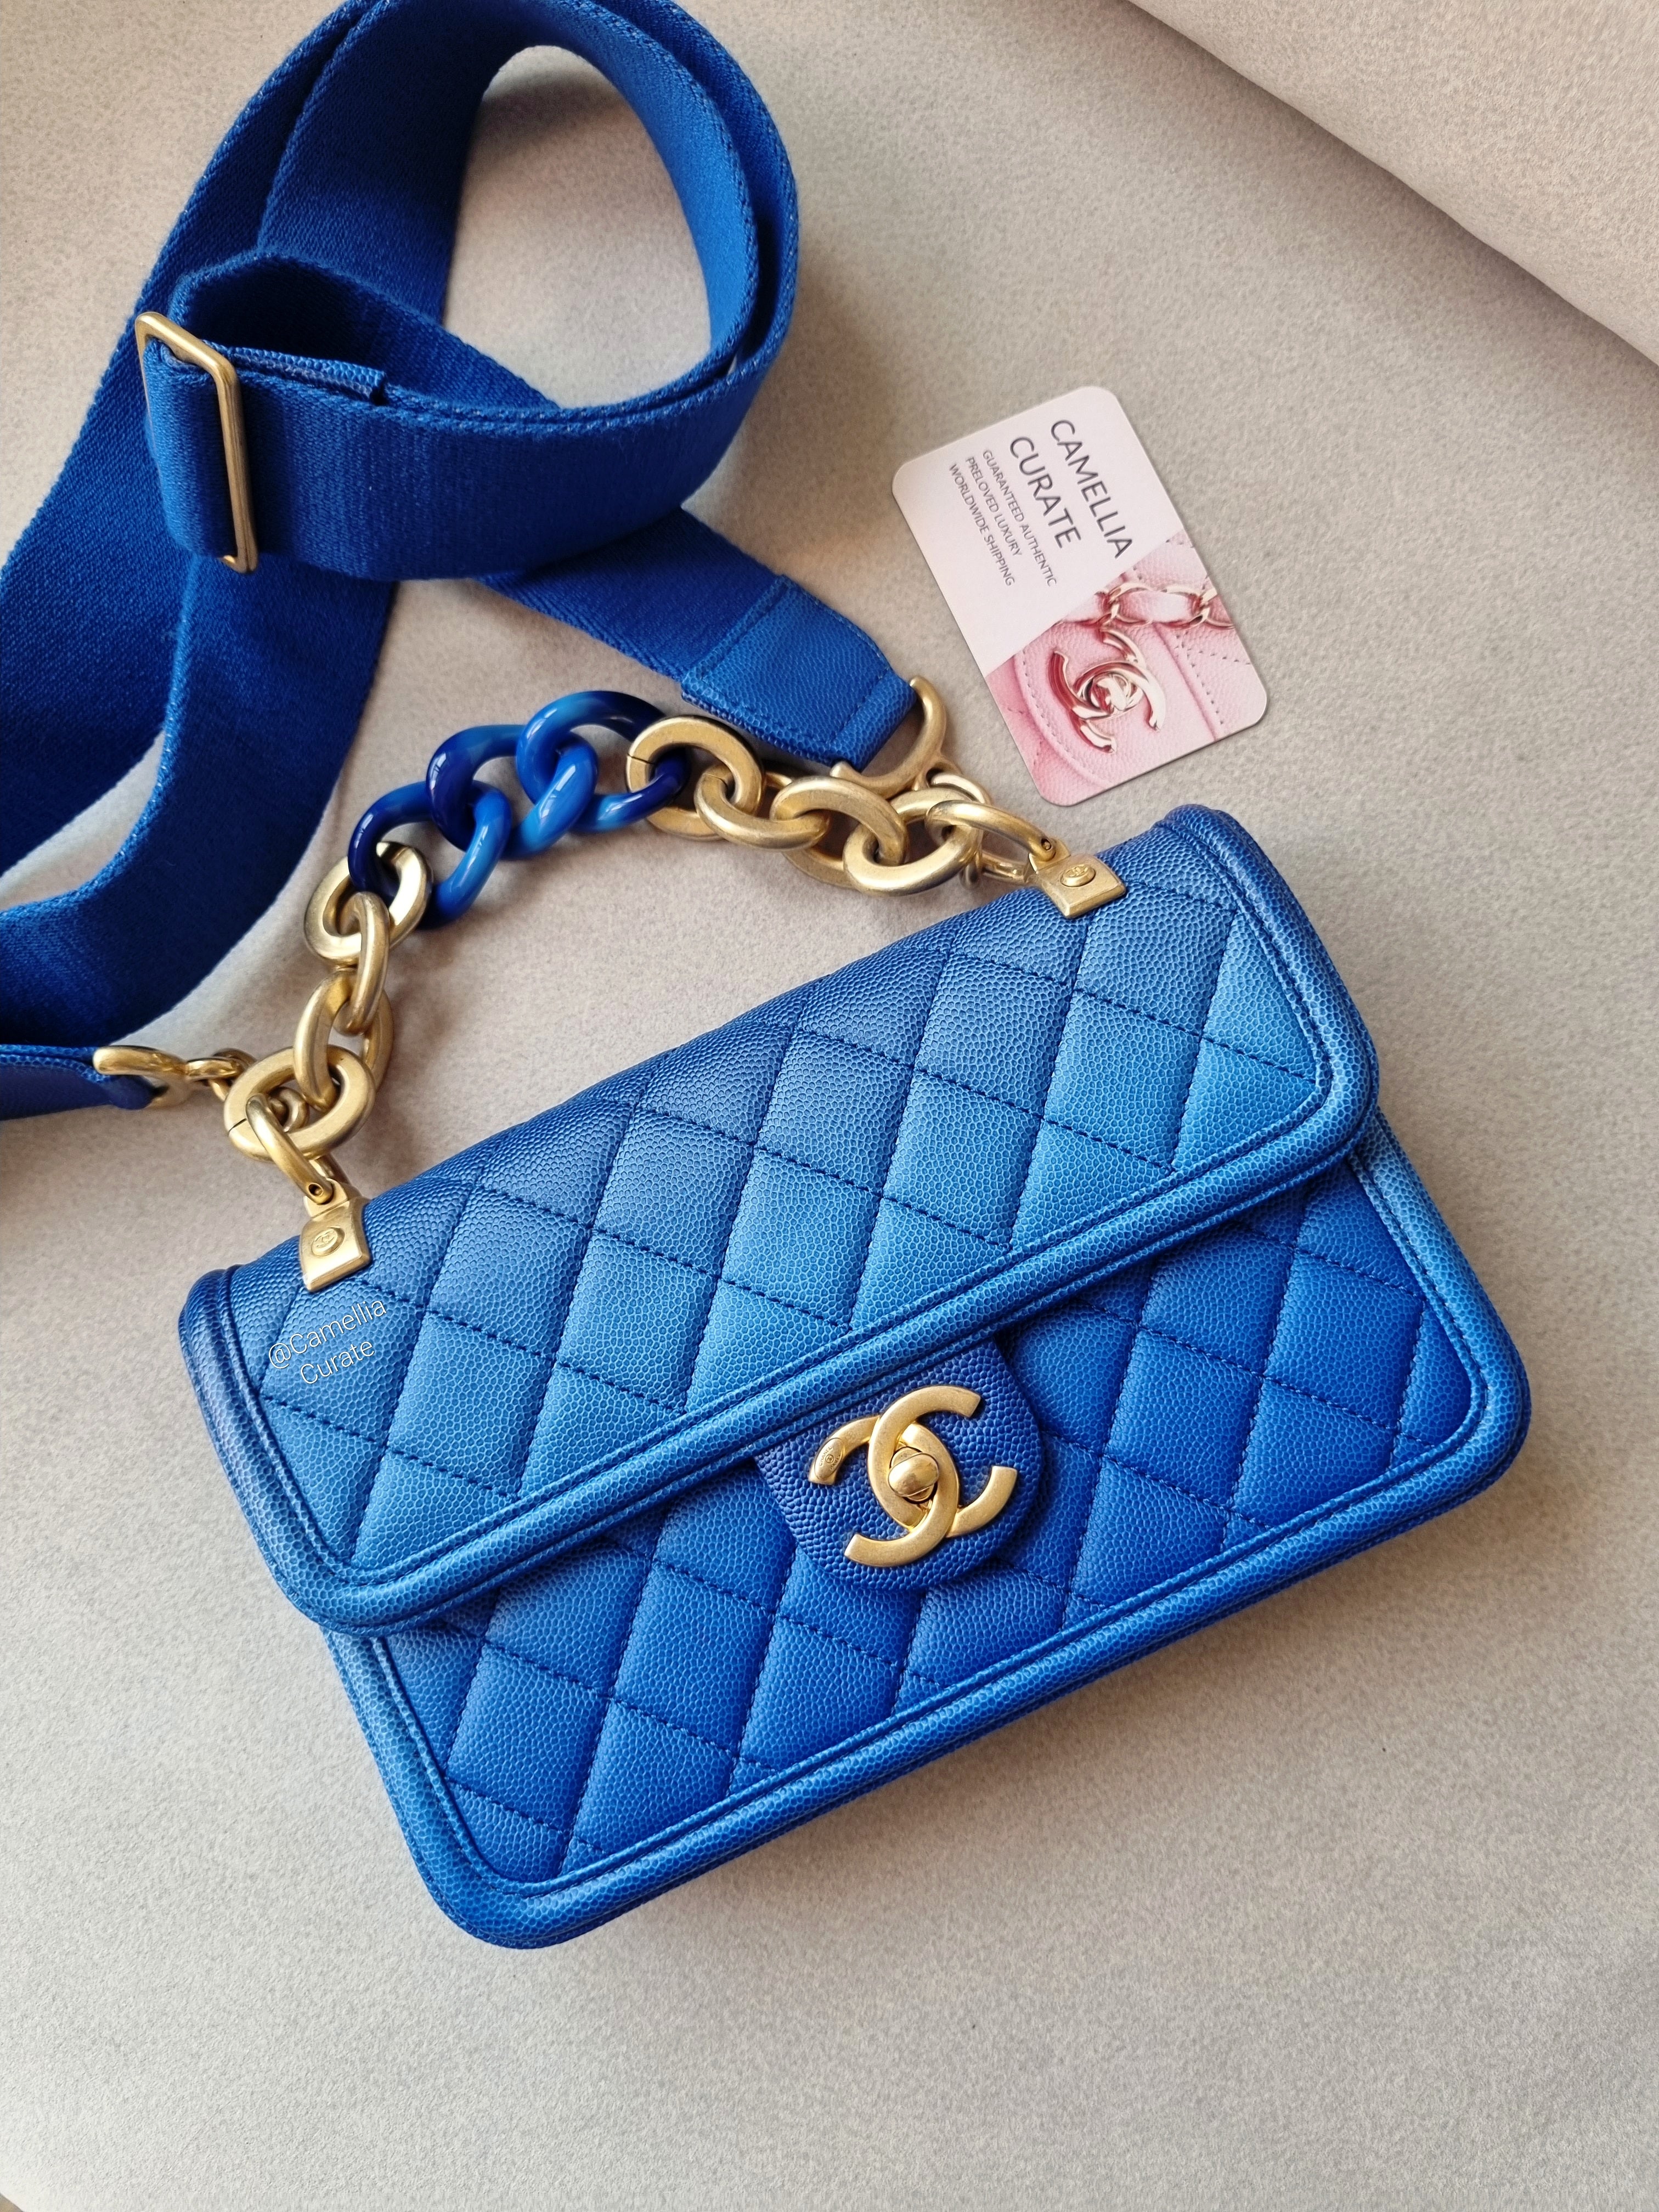 Chanel Sunset By The Sea Bag Small, Blue Caviar Leather Ombre, Preowned in  Box - Julia Rose Boston